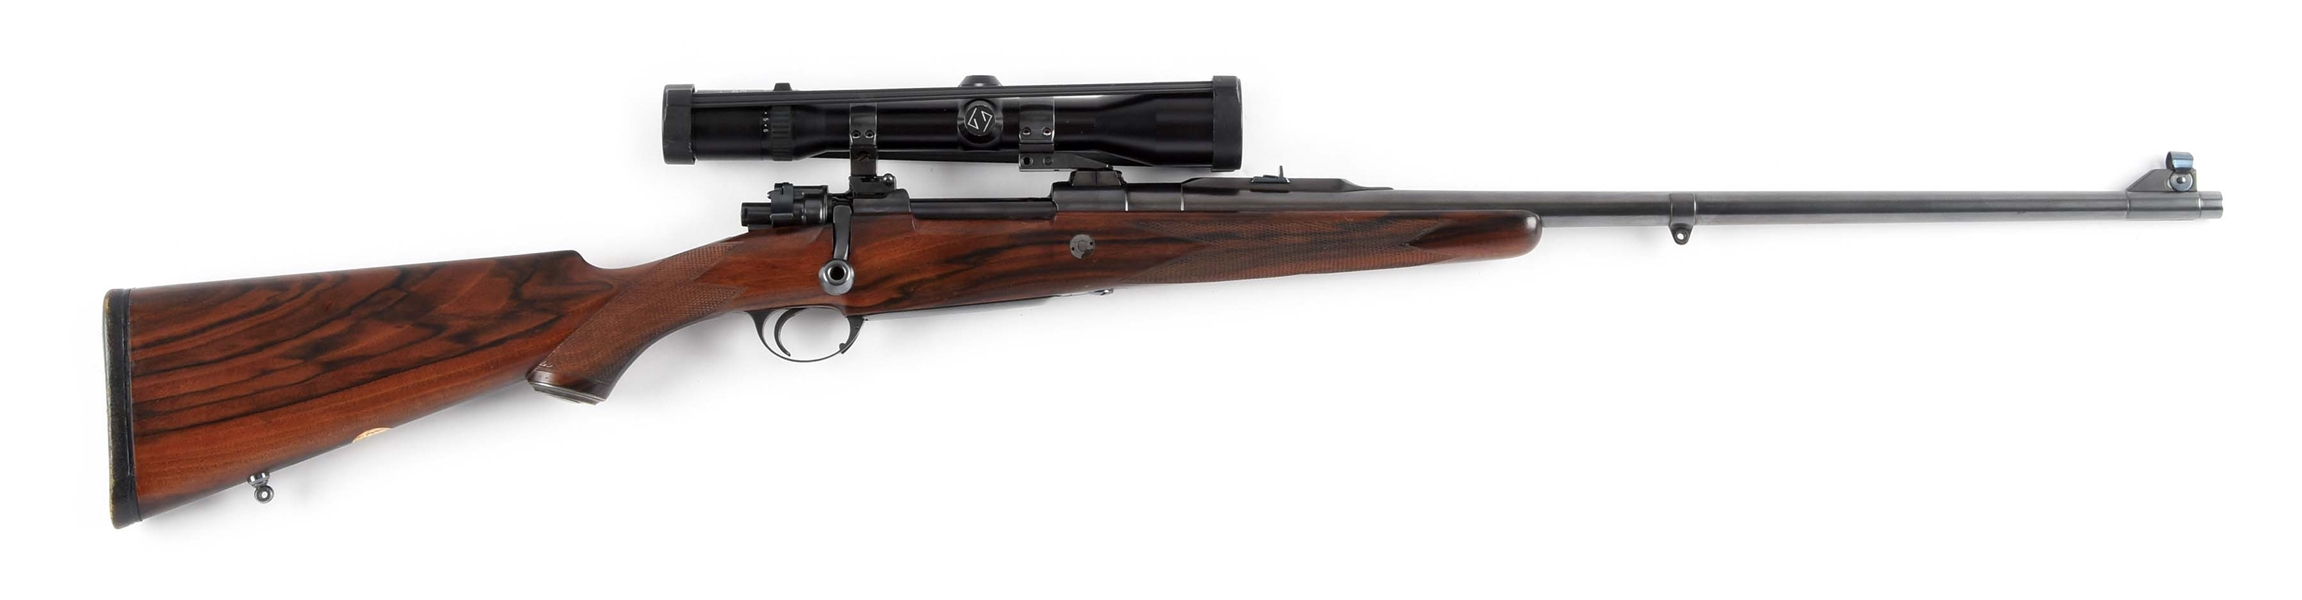 (C) HOLLAND & HOLLAND MAUSER .375 MAGNUM BOLT ACTION TAKEDOWN RIFLE WITH ZEISS SCOPE (1946).